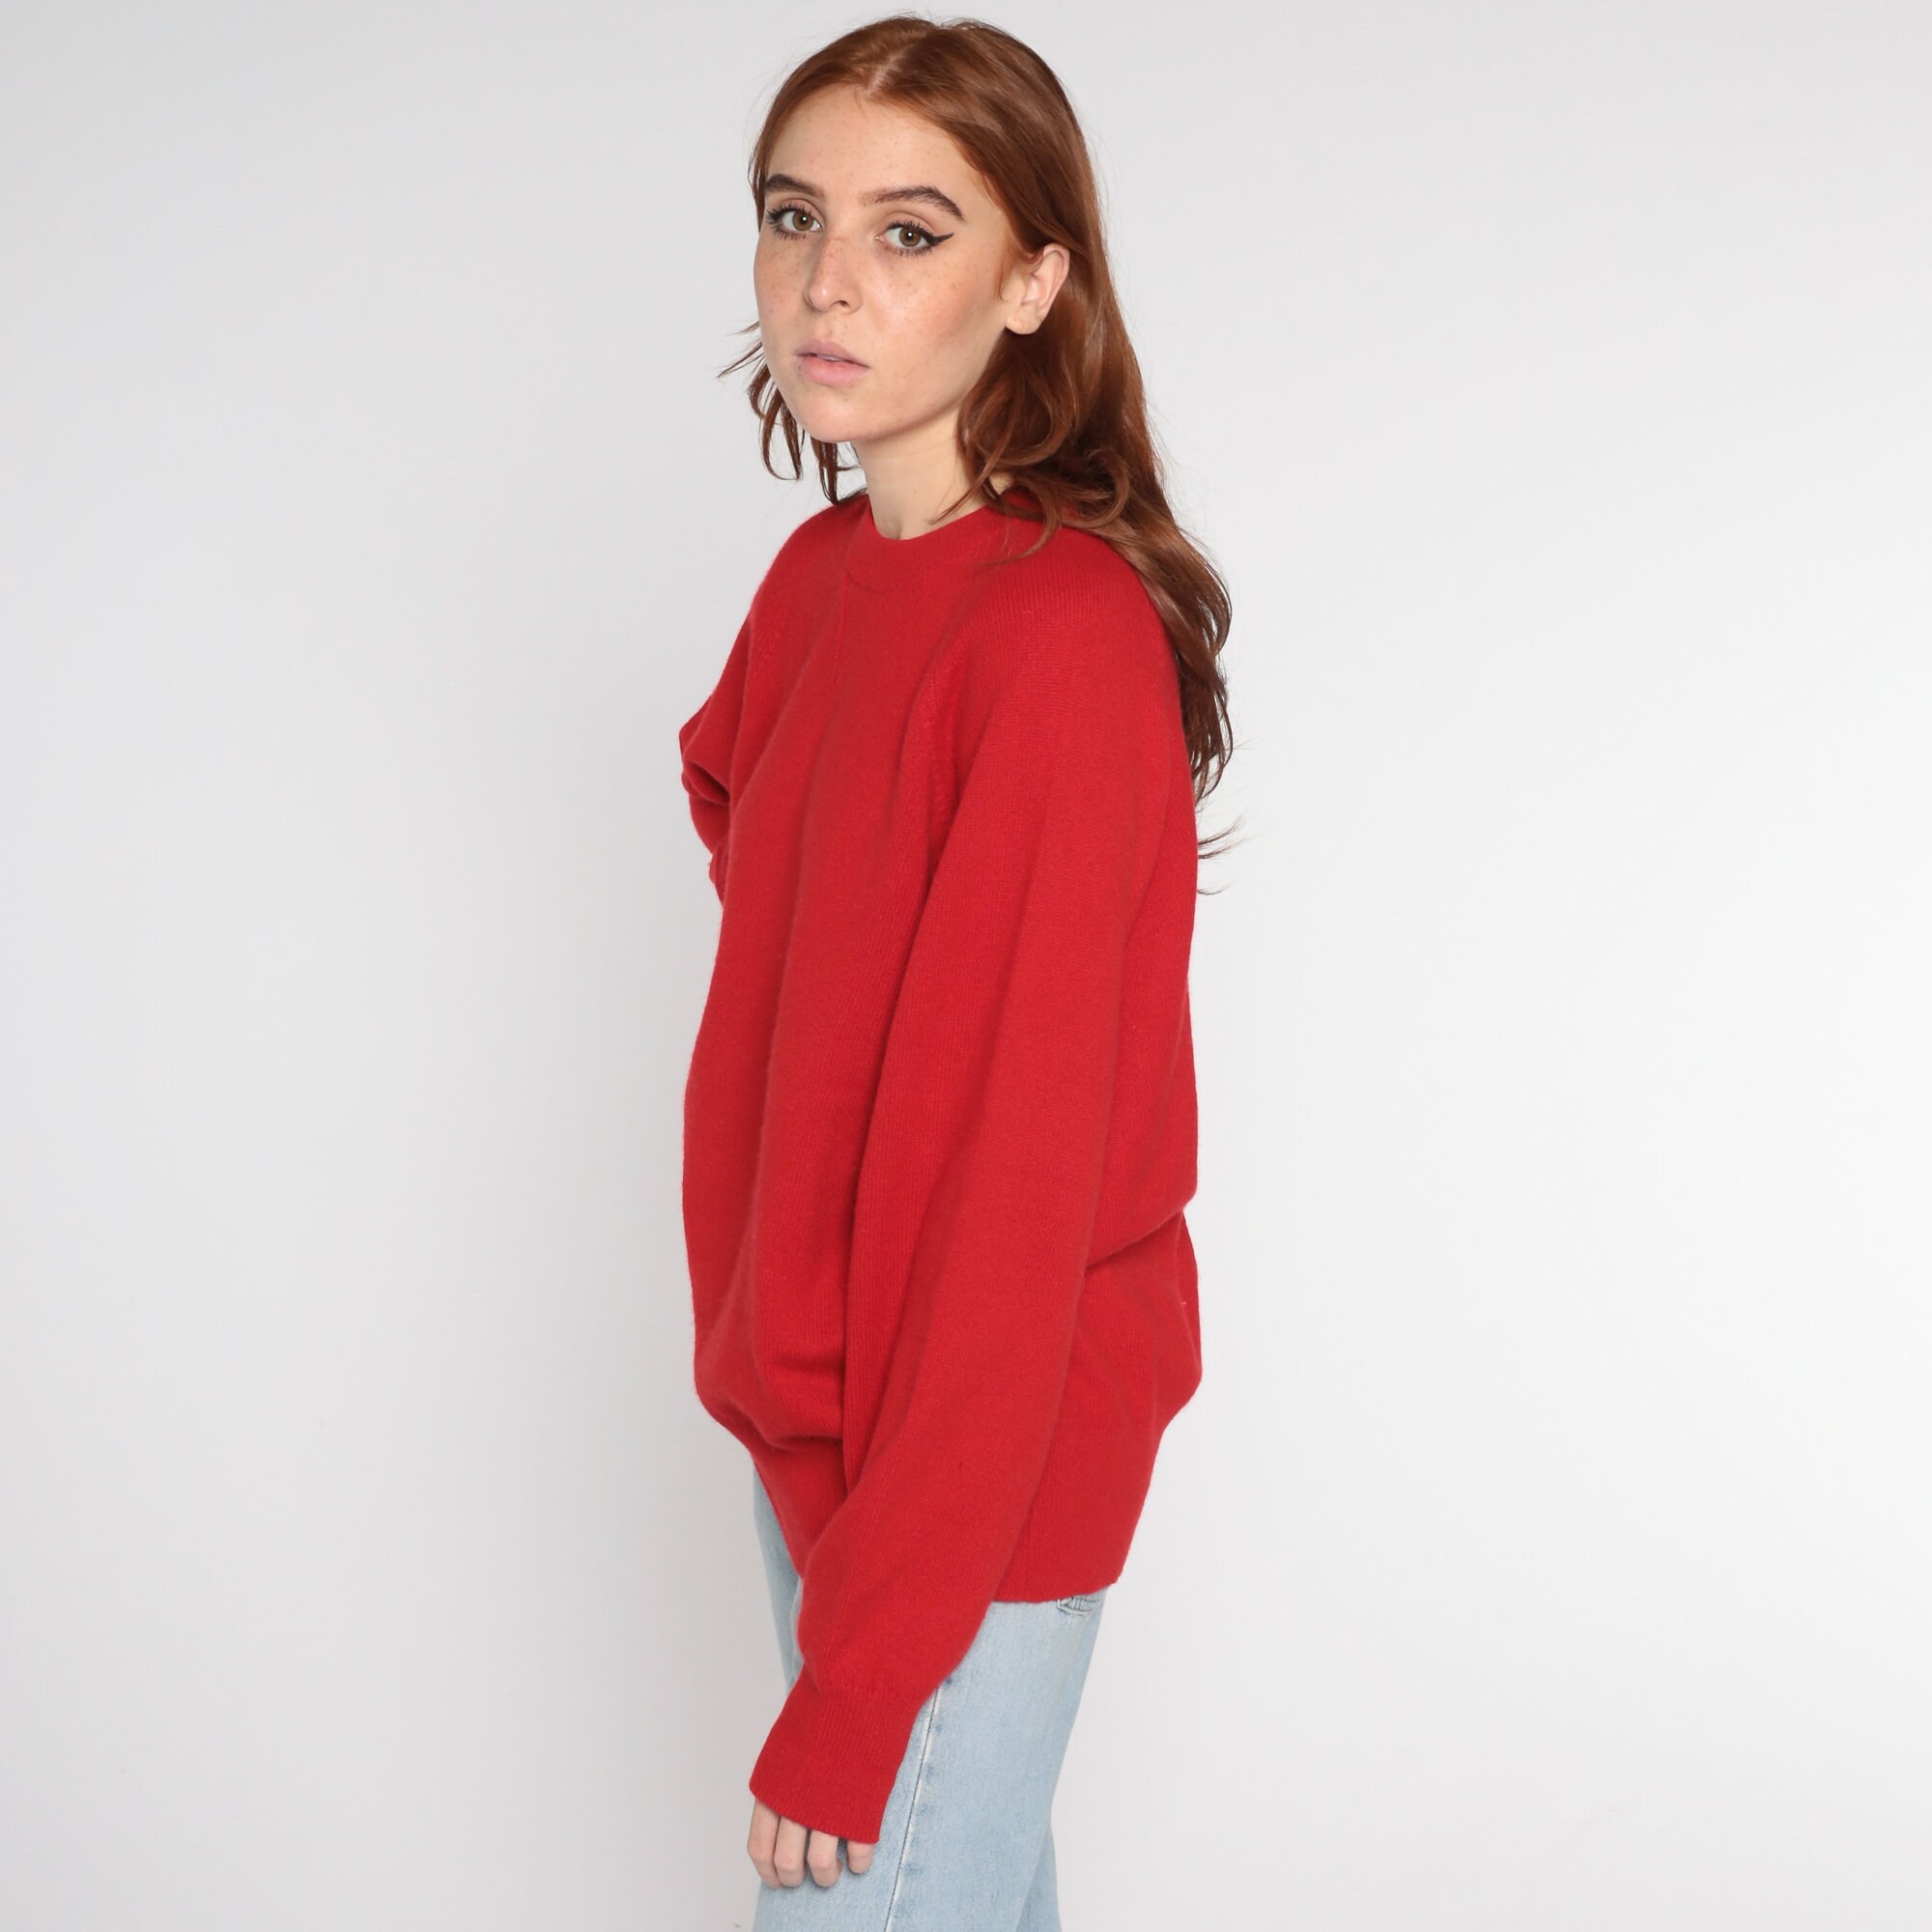 Red Cashmere Sweater 90s Plain Knit Pullover Sweater Basic Simple ...